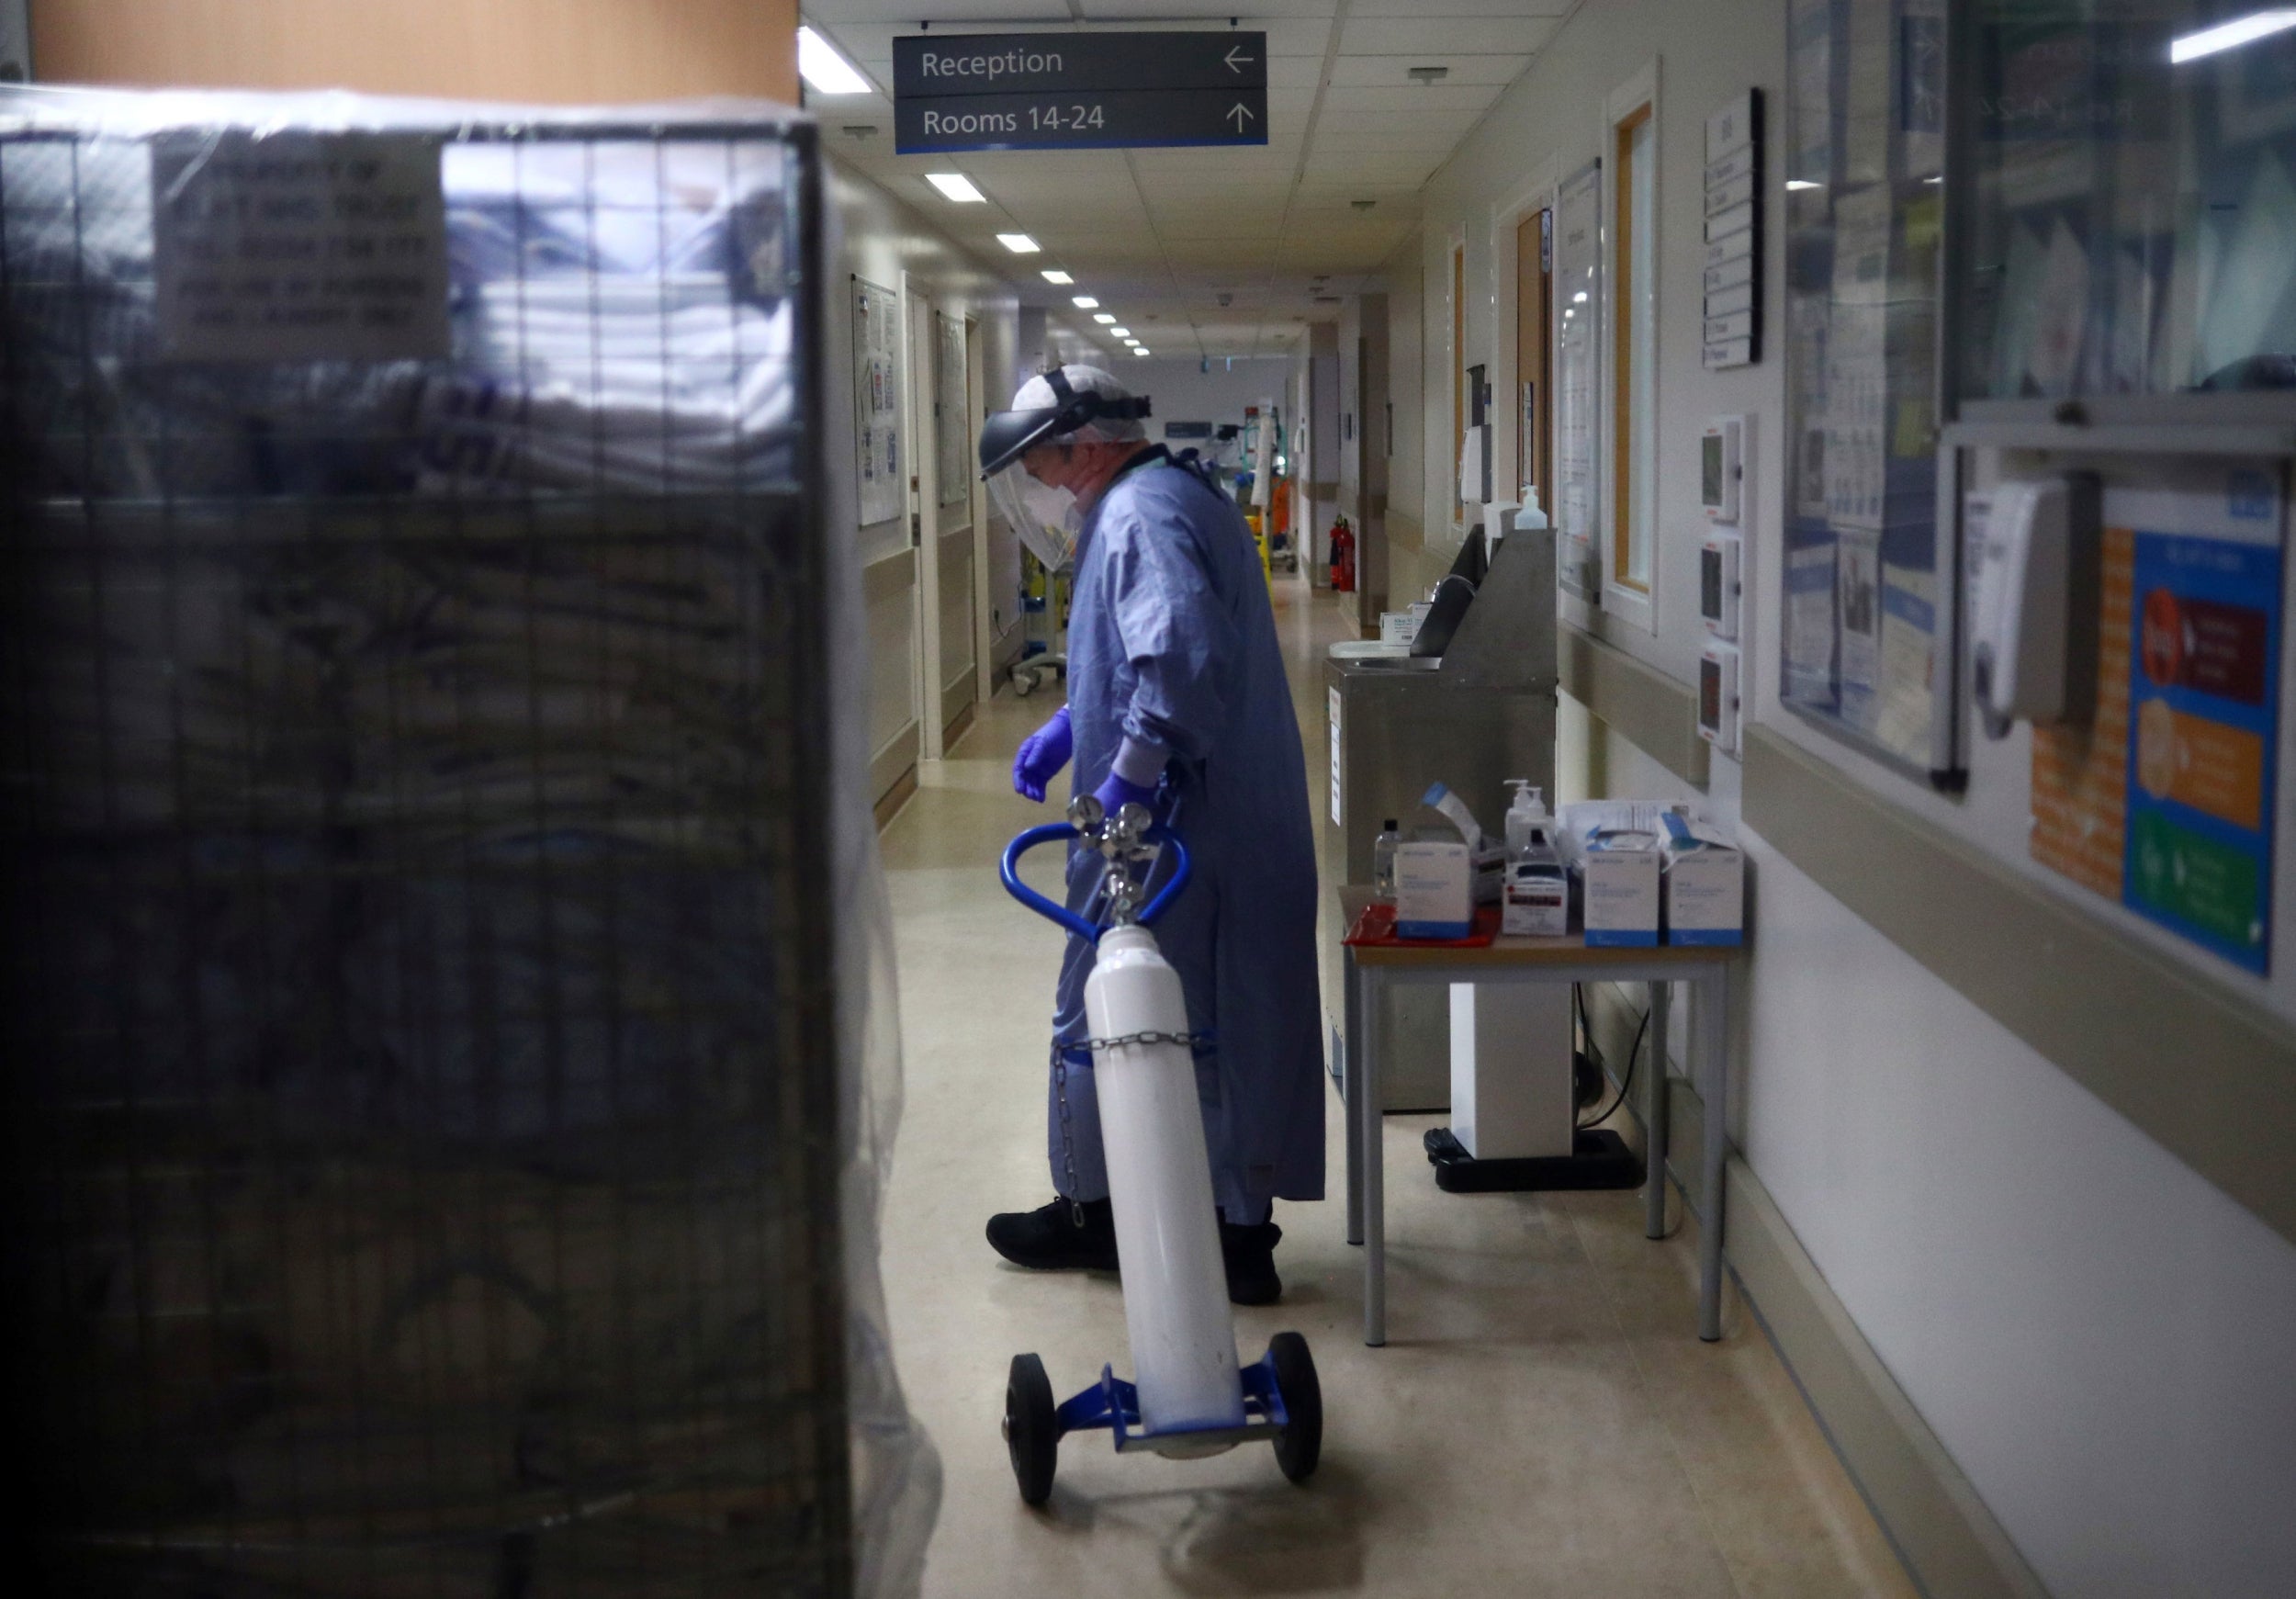 A medical worker moves an oxygen tank at a hospital in Lancashire